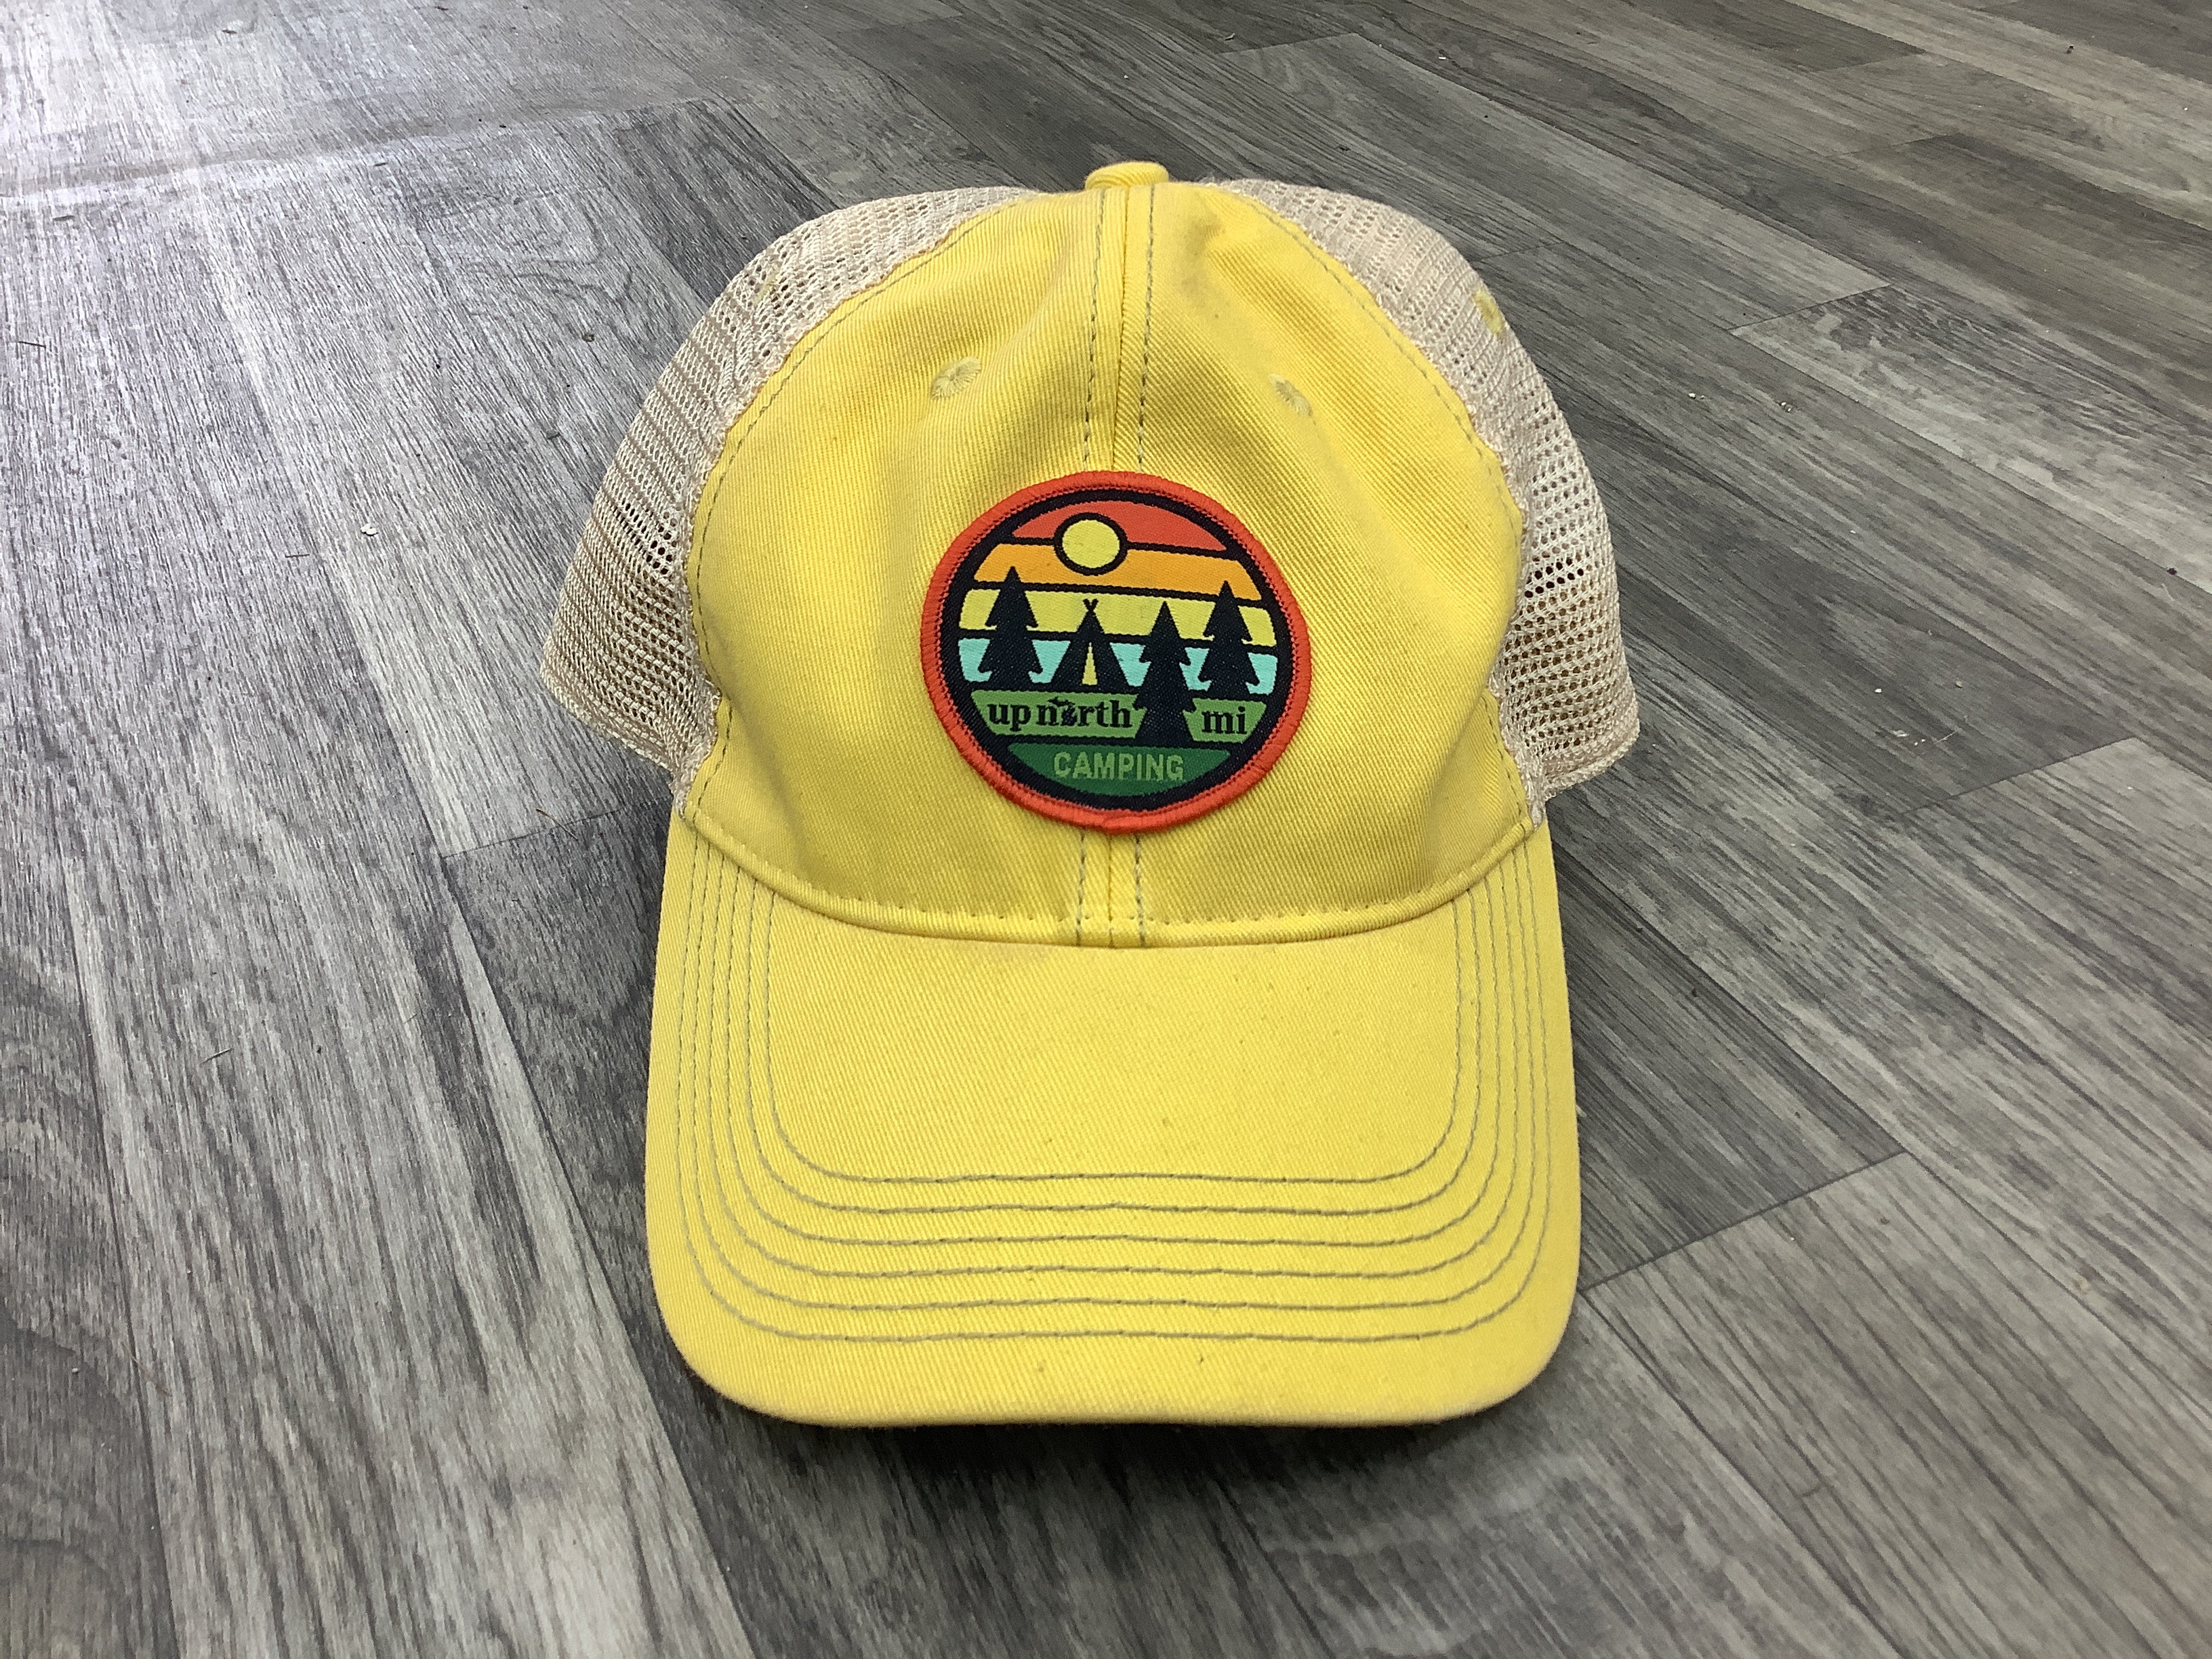 "Camping Up North" - Michigan - Kiwi - Woven Patch Hat